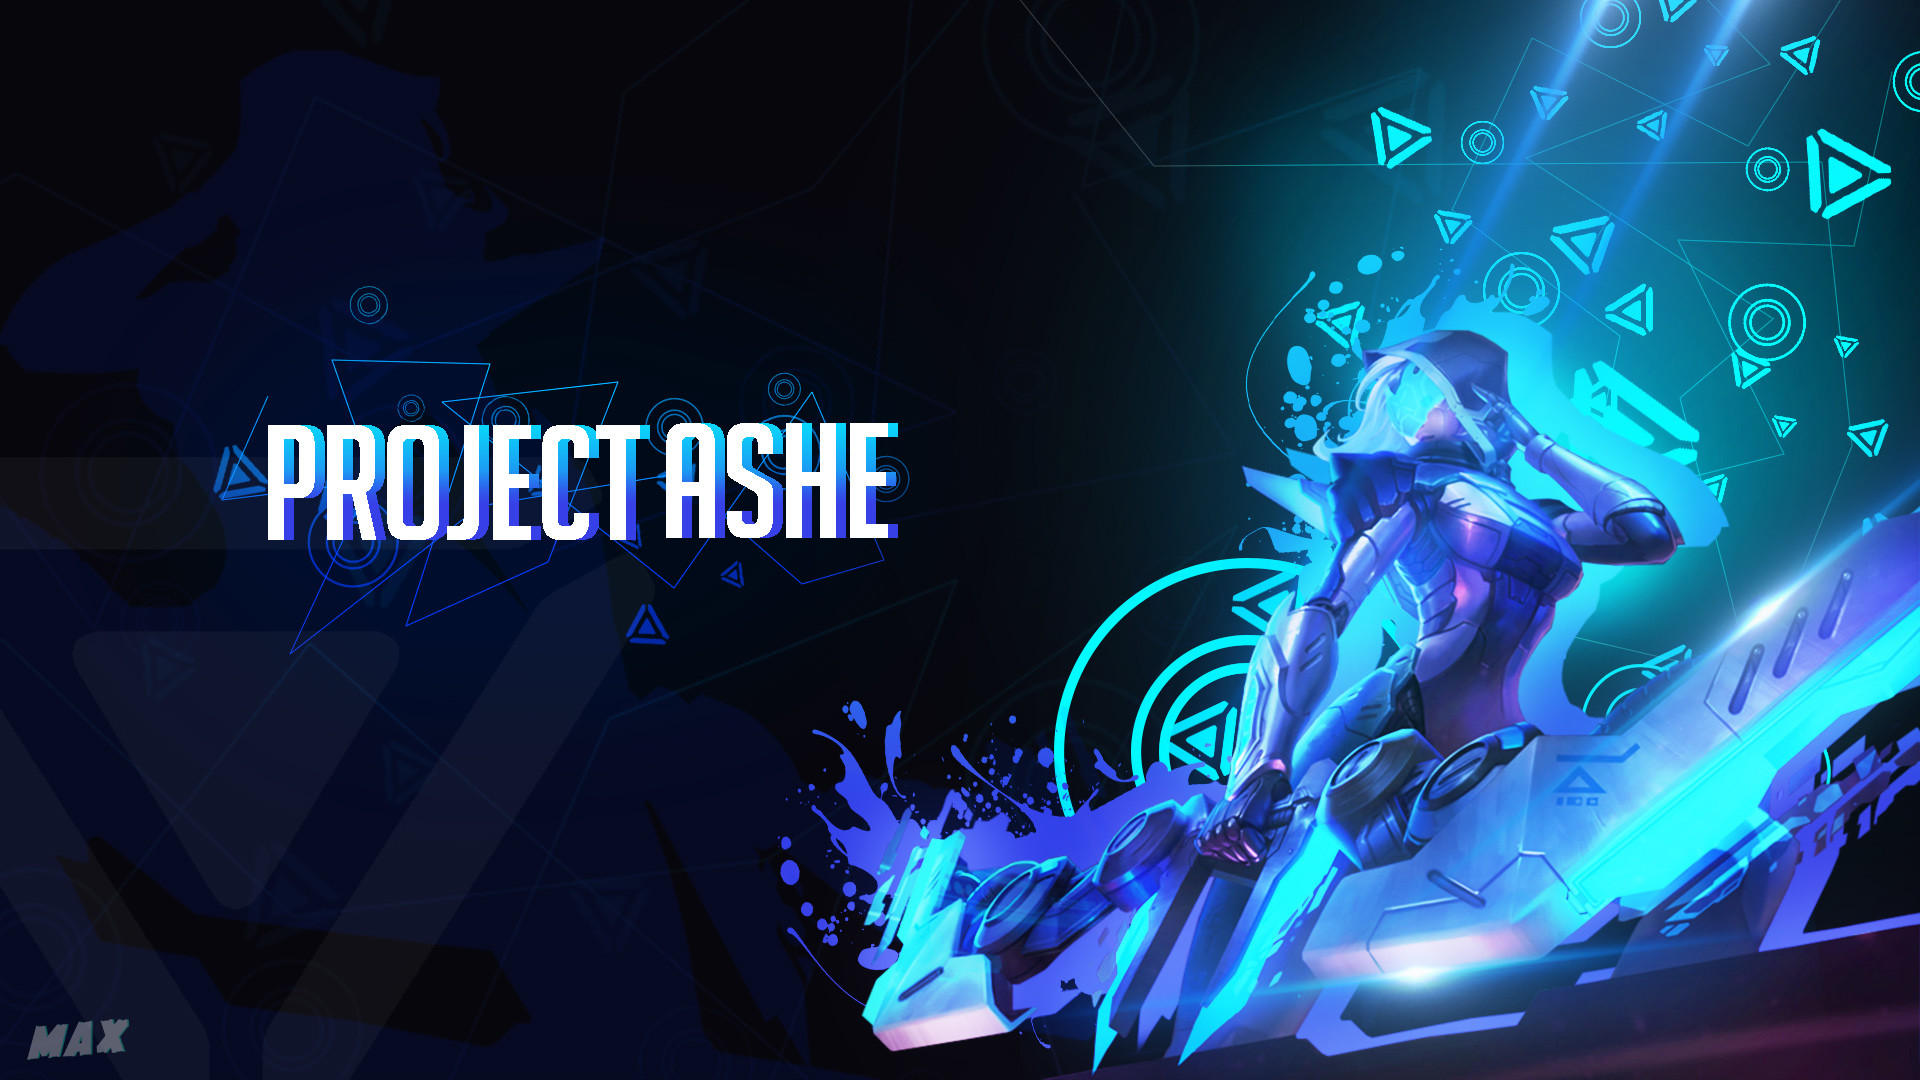 project ashe wallpaper,light,graphic design,font,electric blue,performance